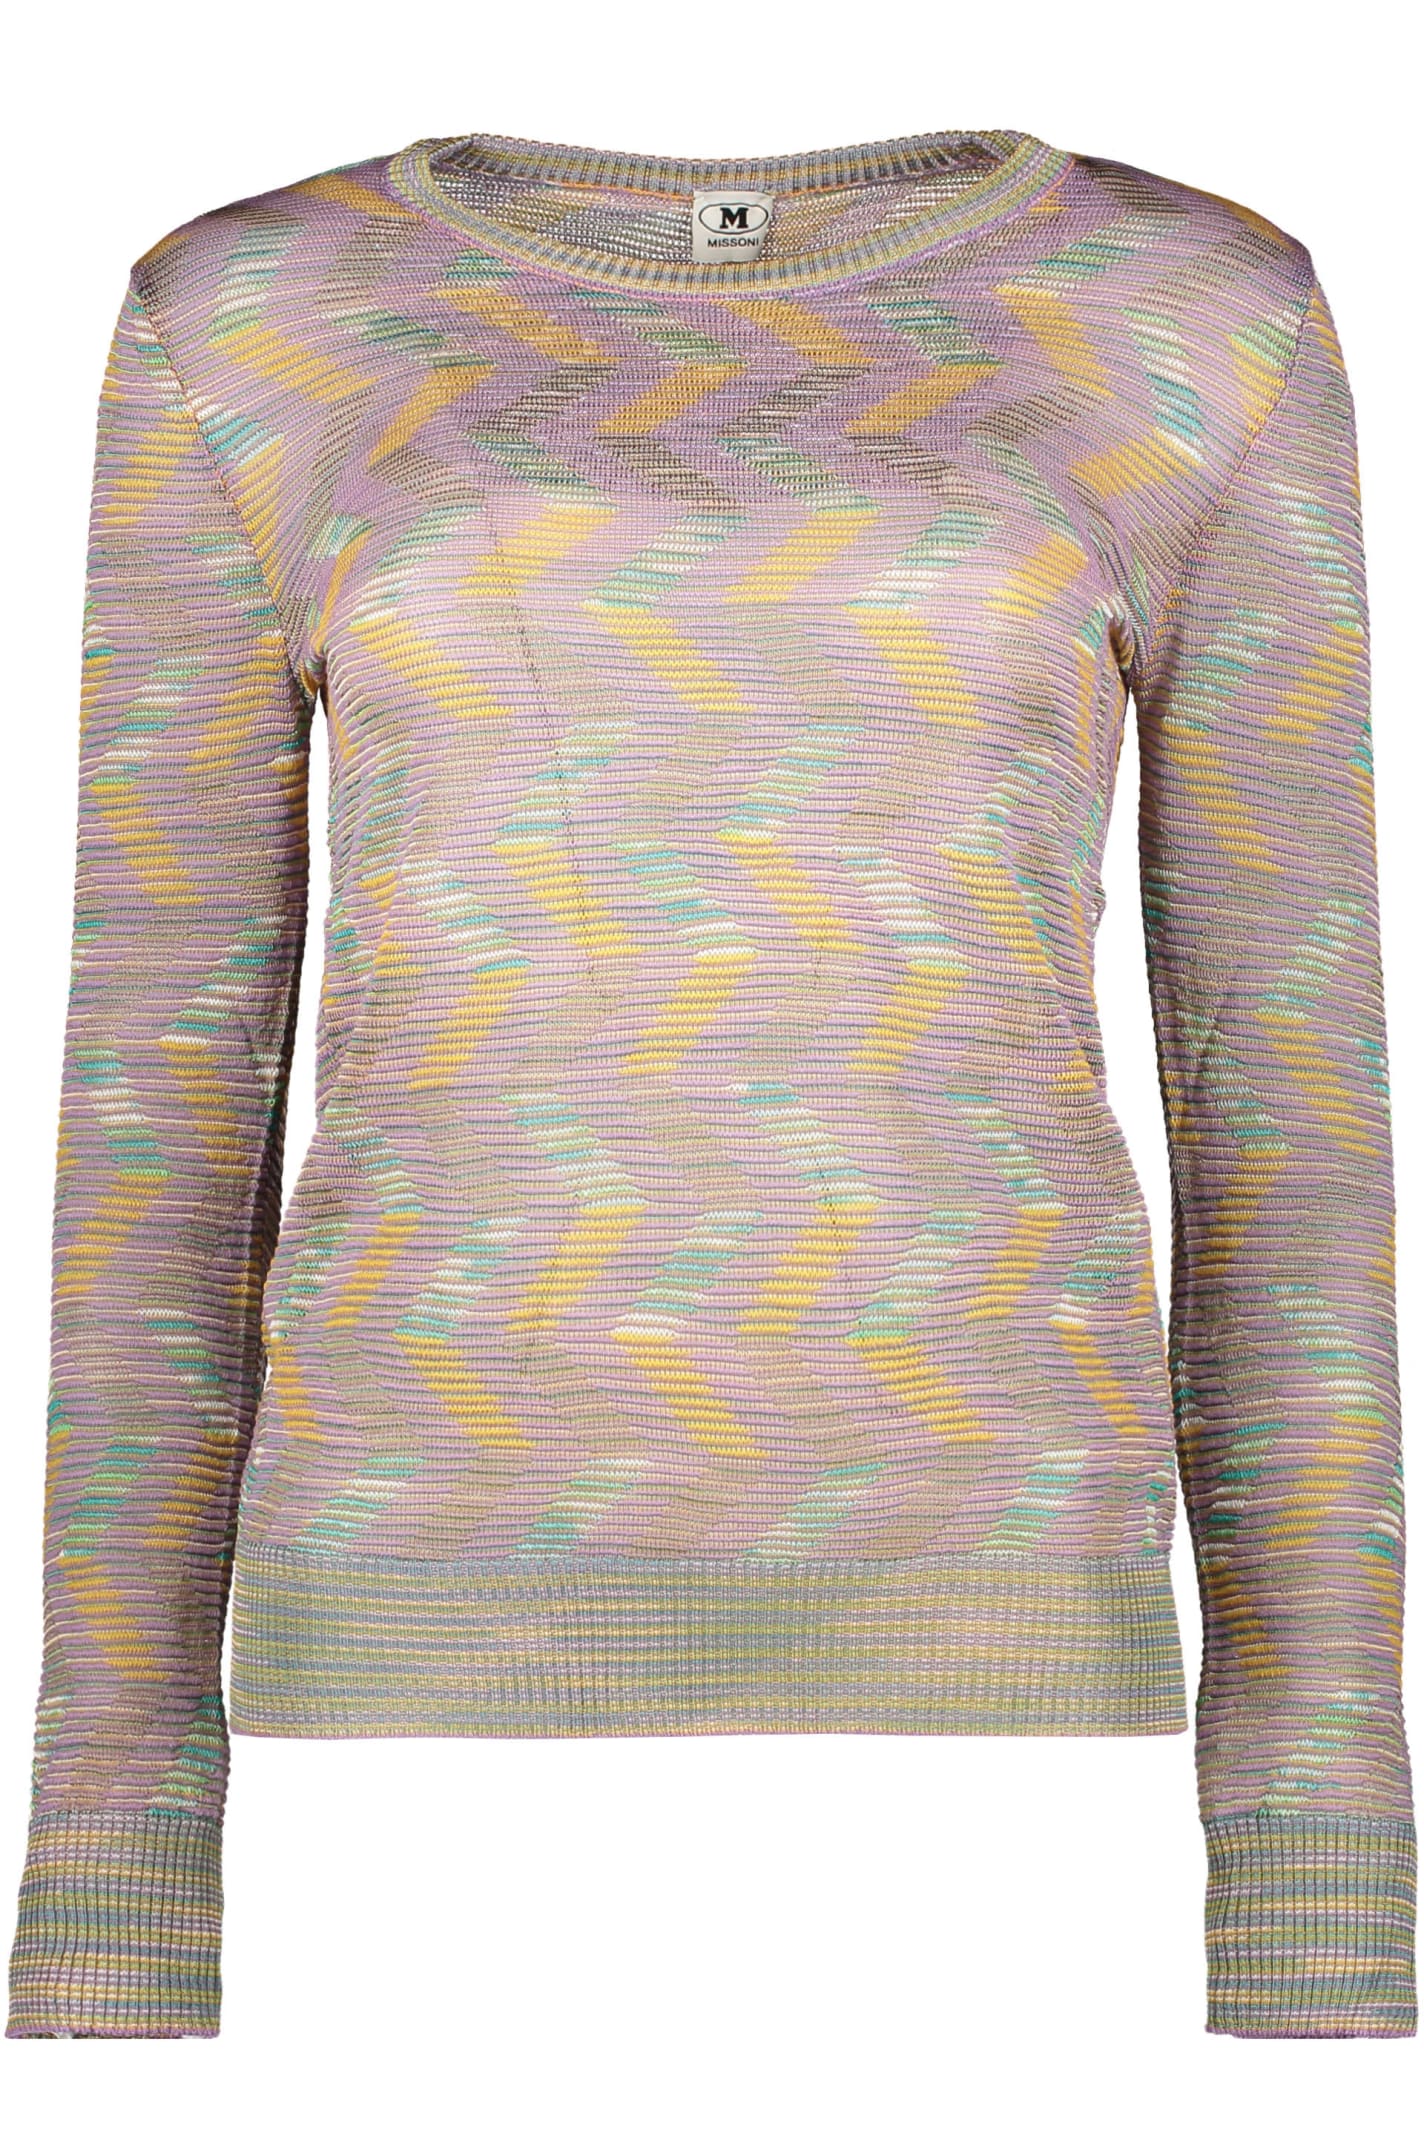 M Missoni Long Sleeve Crew-neck Sweater In Lilac